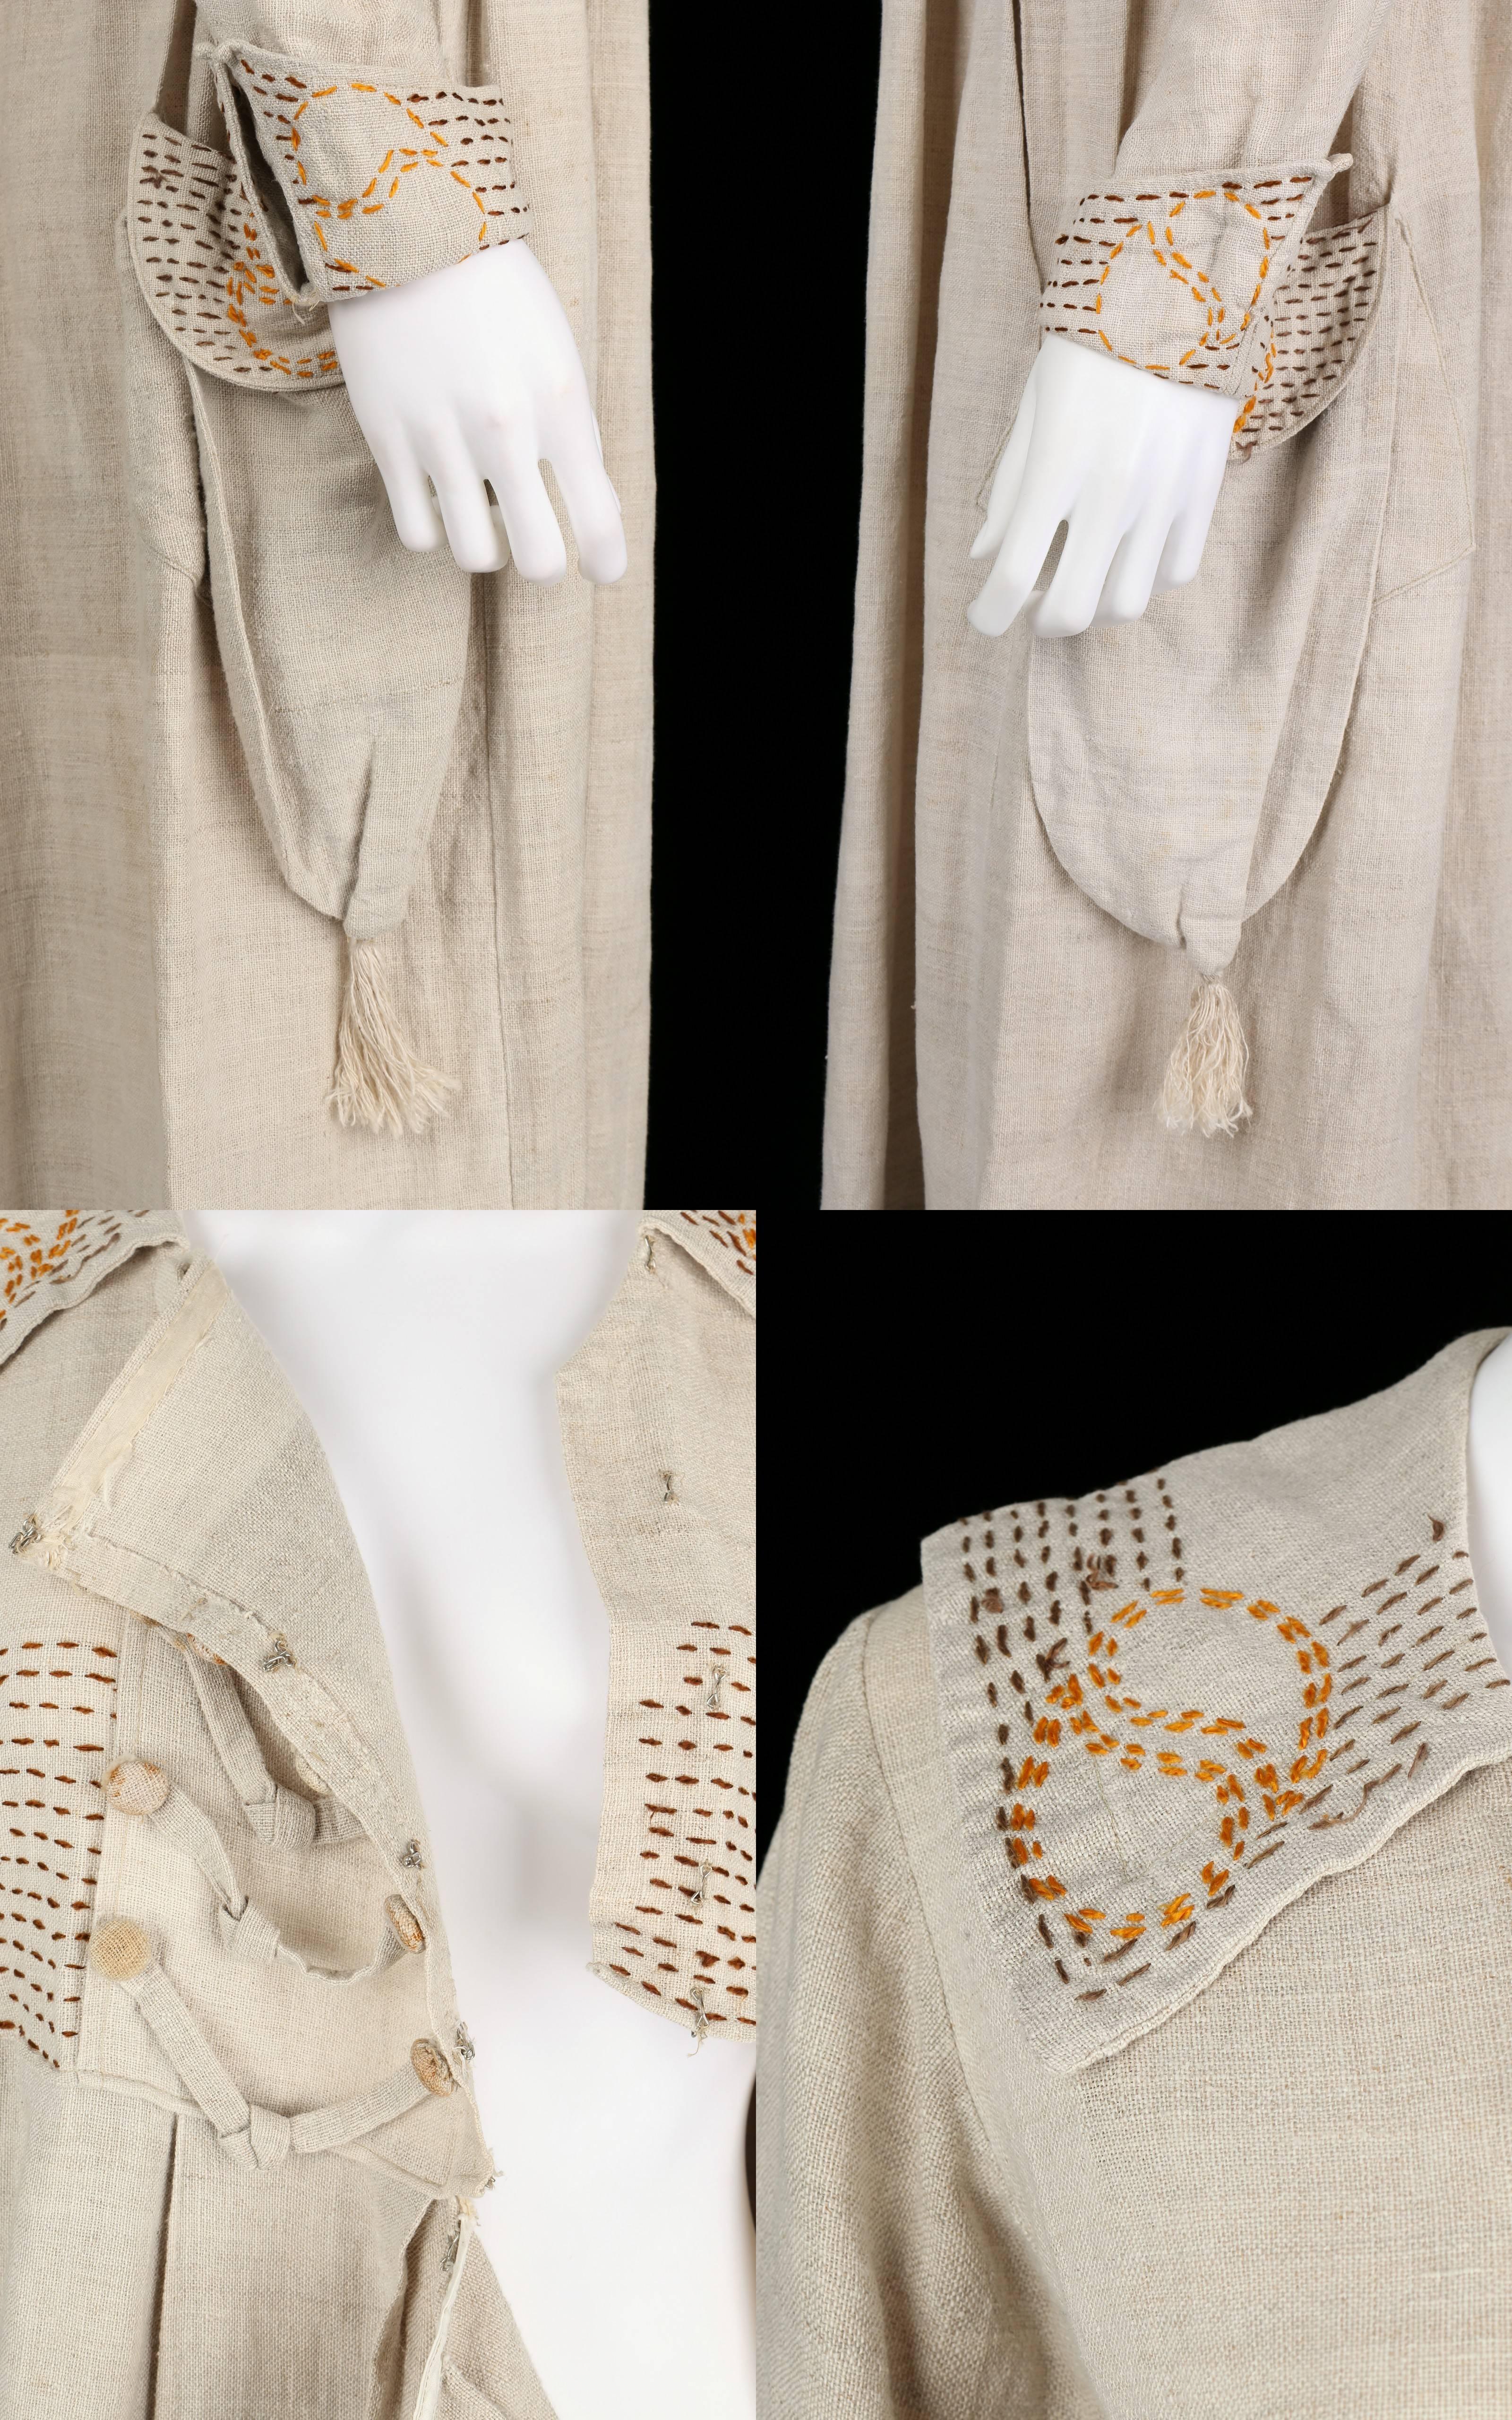 COUTURE Edwardian c.1910s Natural Linen Hand Embroidered Rural Smock Frock Dress 1